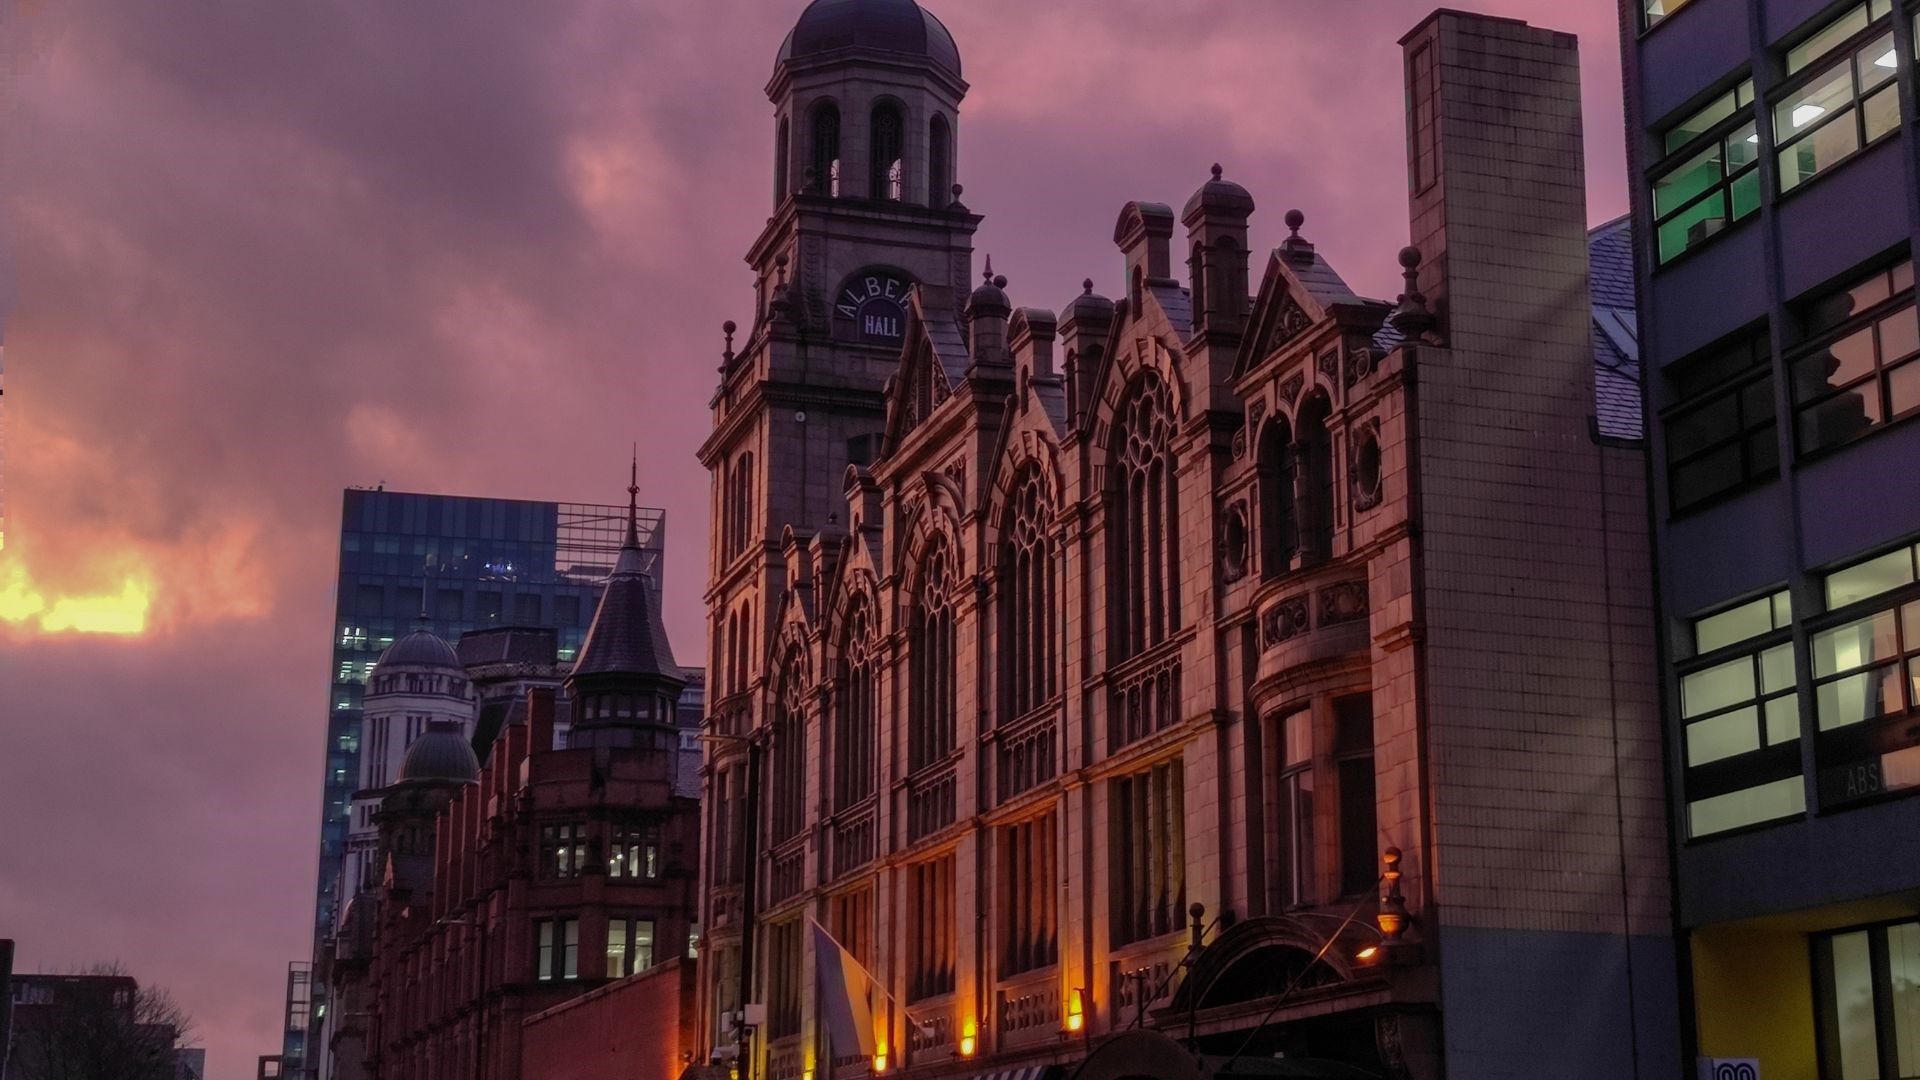 a city street at dusk with buildings and a clock tower